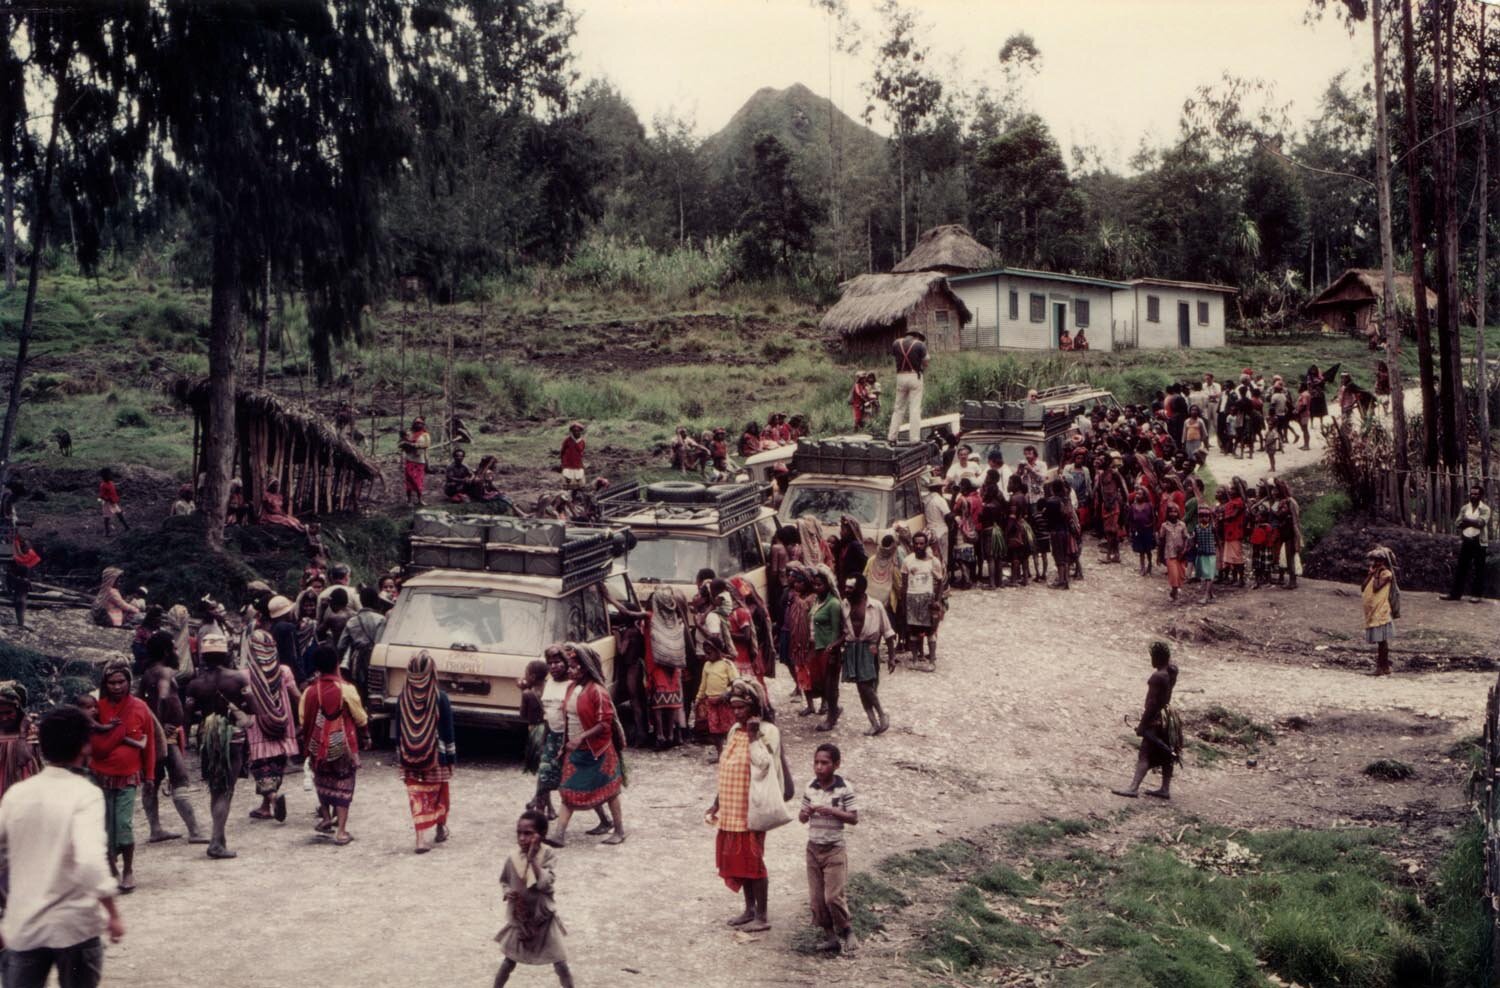  1982’s Camel Trophy took place in Papua New Guinea, where the convoy of Range Rovers made quite an impression on the local population.  Photo Andreas Bender 